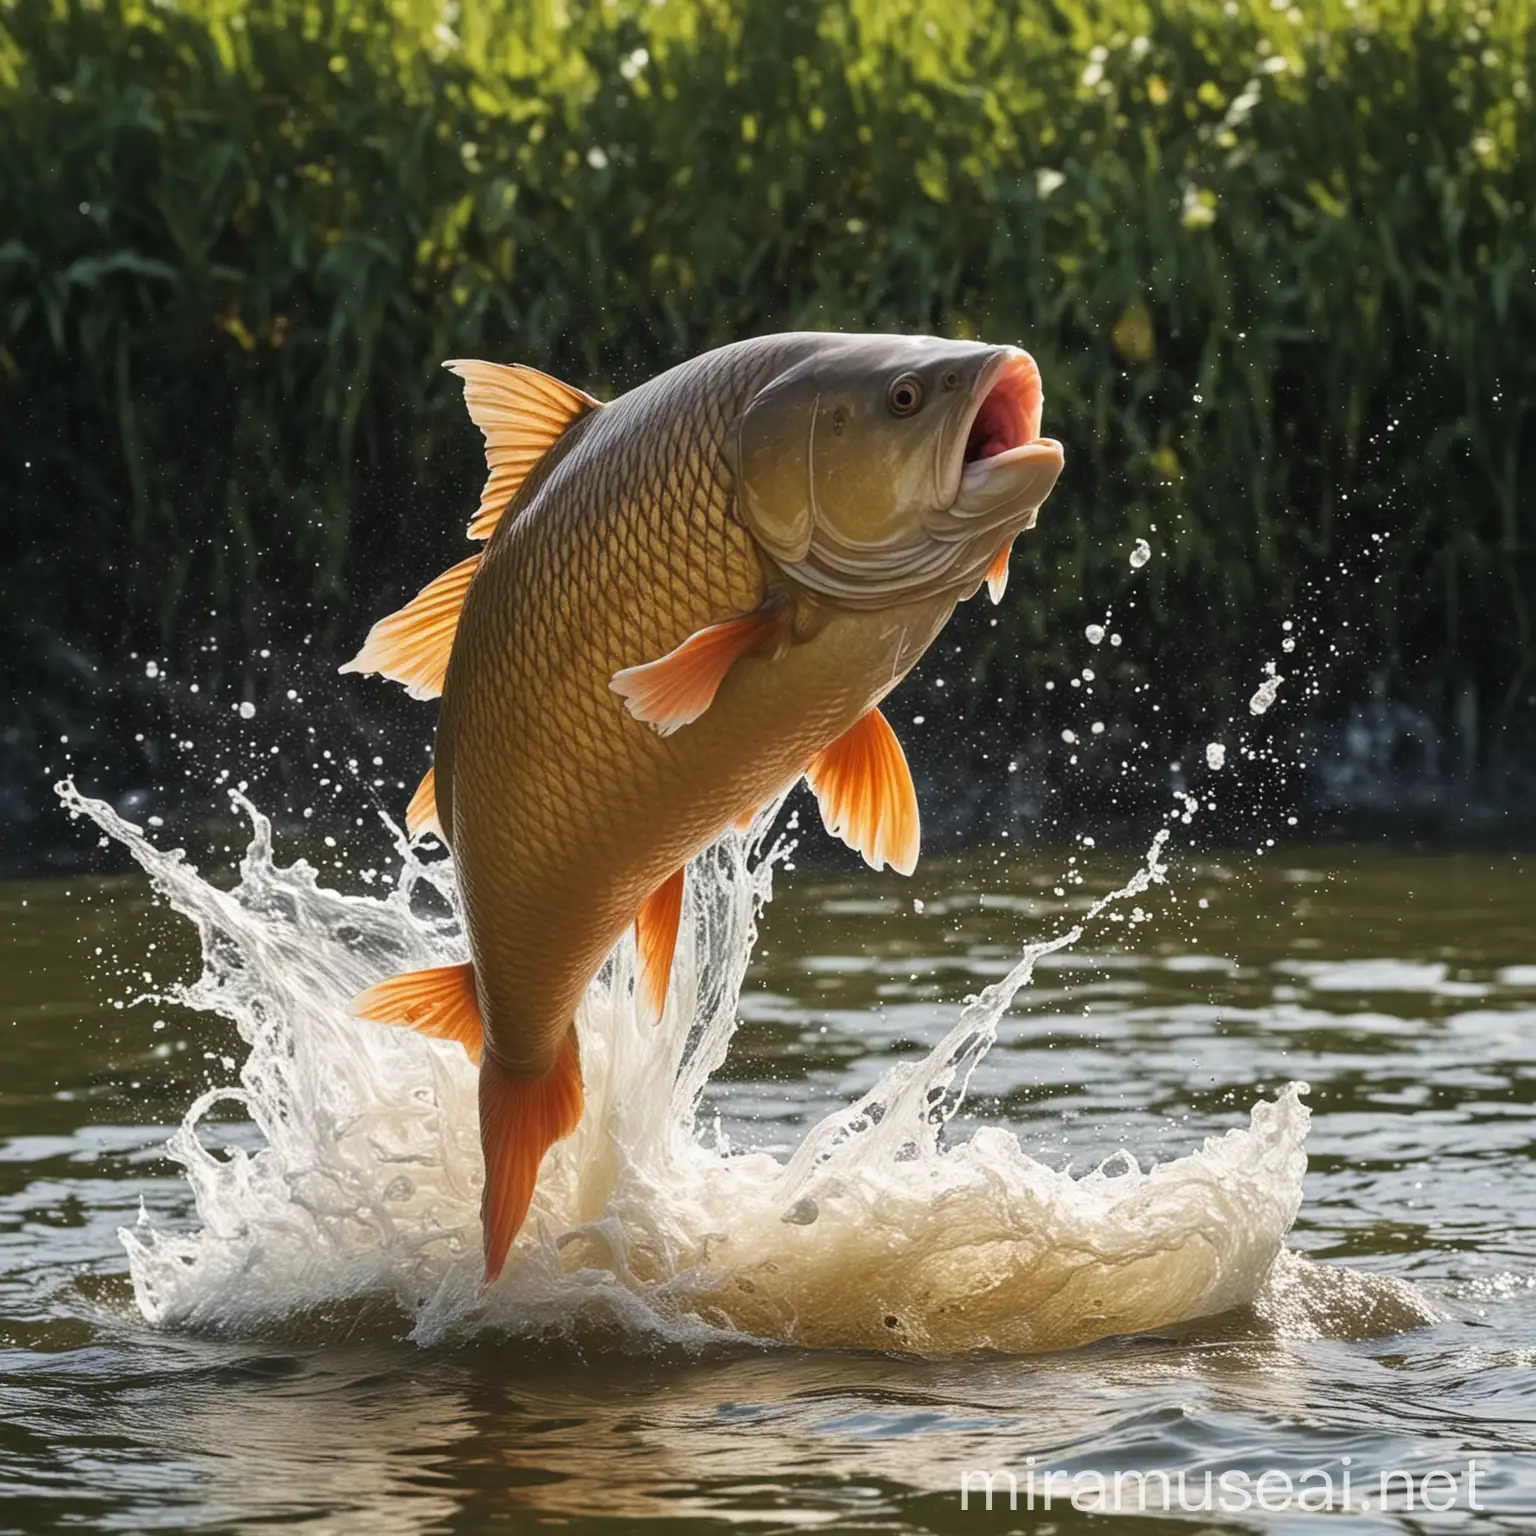 carp jumping out of the water